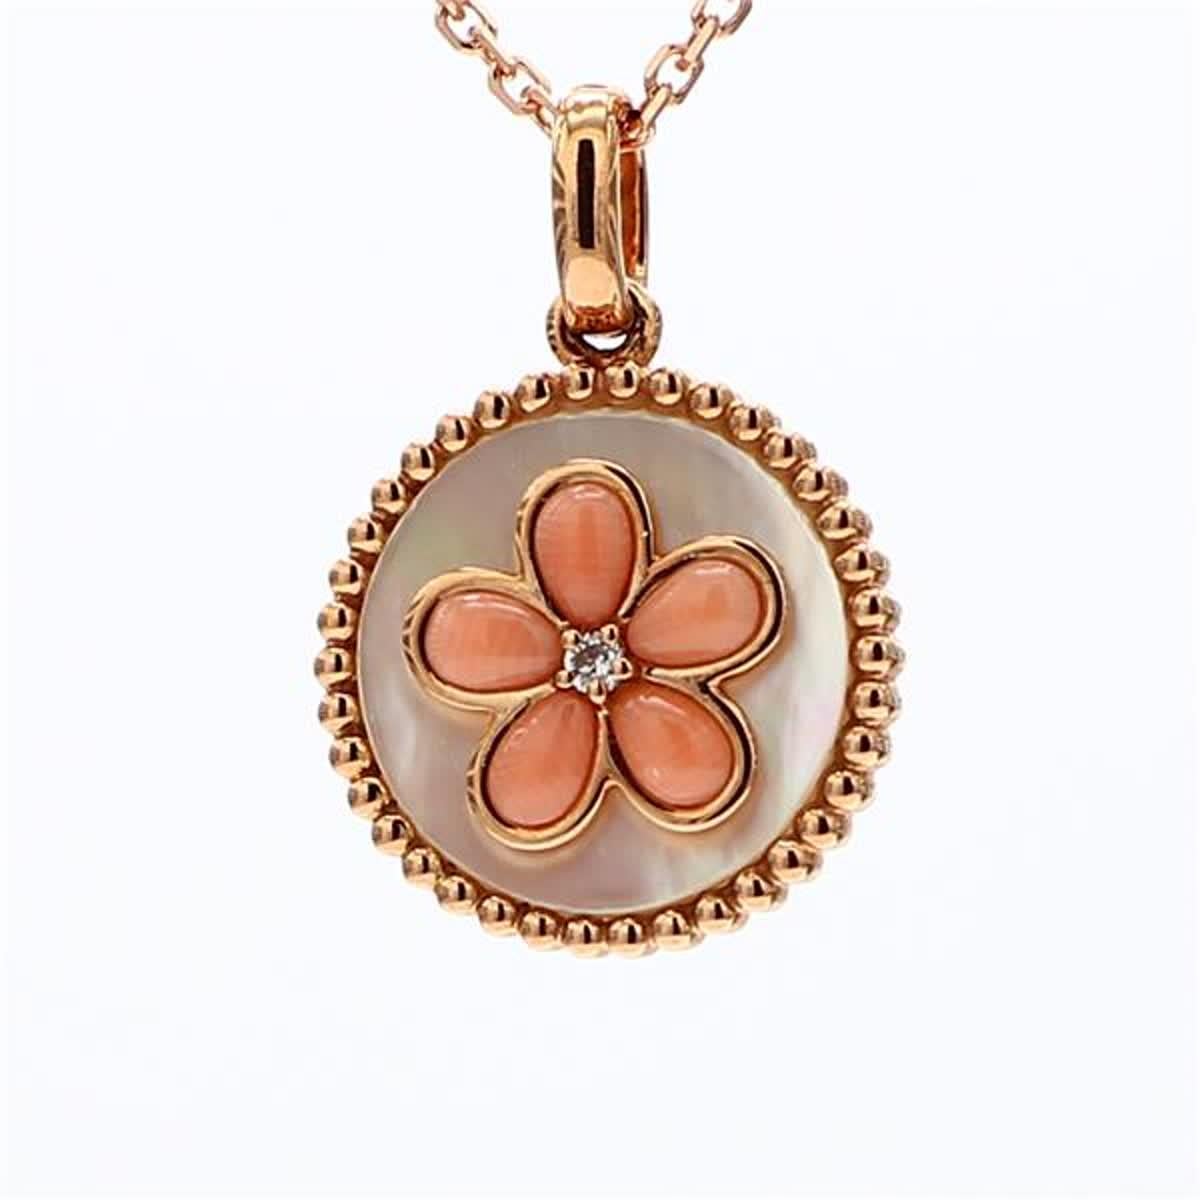 RareGemWorld's classic pink shell and pearl pendant. Mounted in a beautiful 18K Rose Gold setting with a round natural pearl and a flower shape natural pink shell. The center pieces are complimented by a natural round white diamond. This pendant is